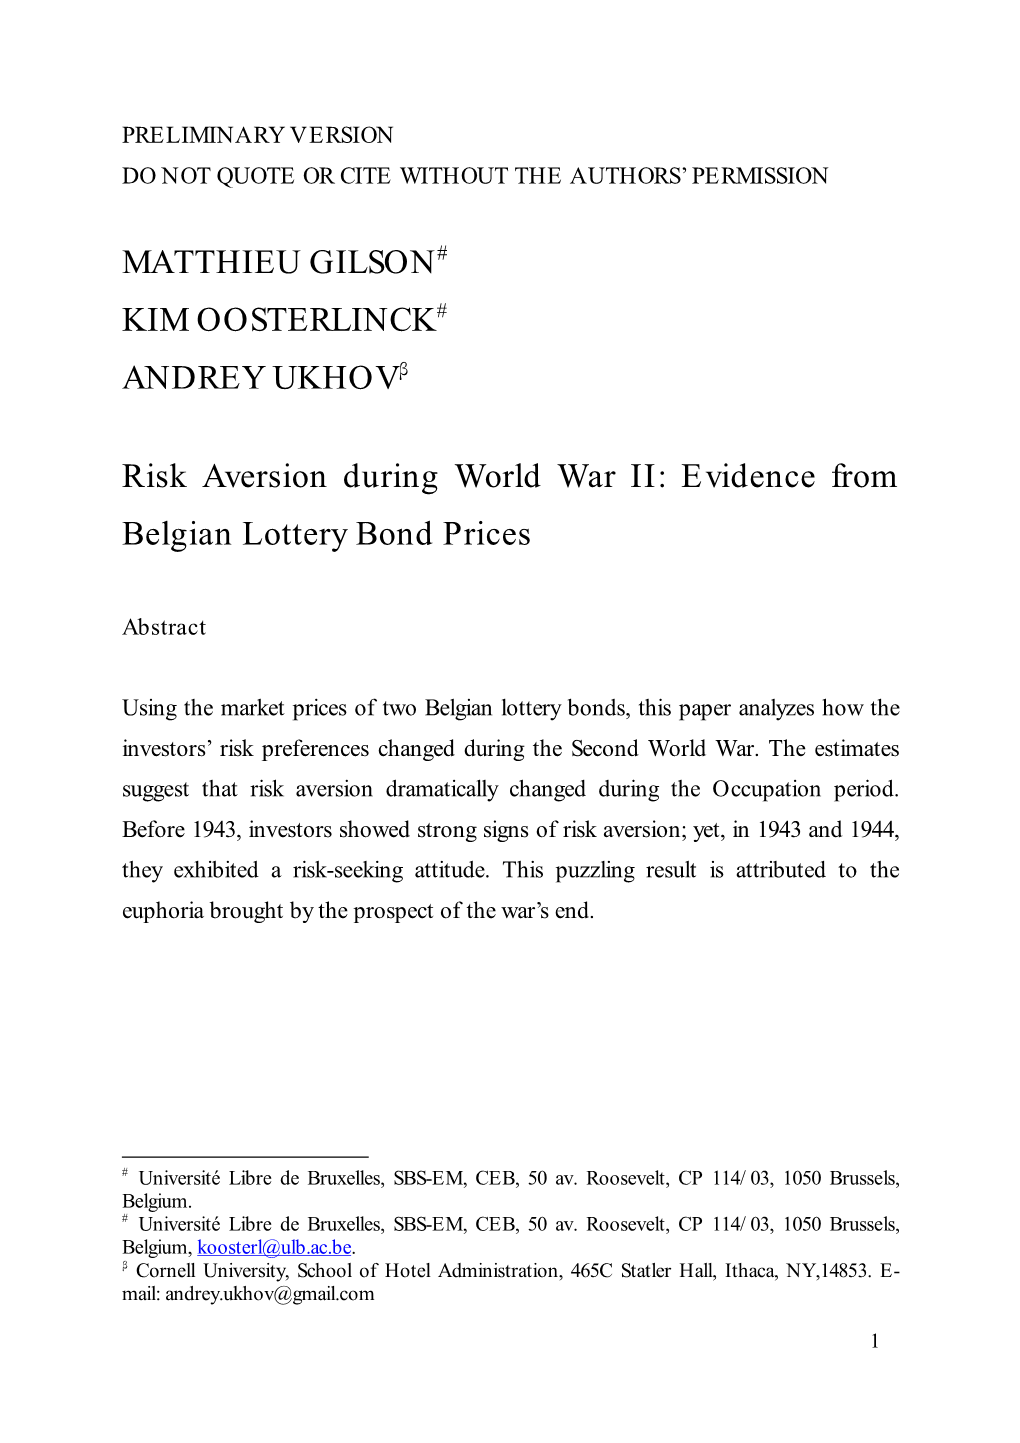 Risk Aversion During World War II: Evidence from Belgian Lottery Bond Prices